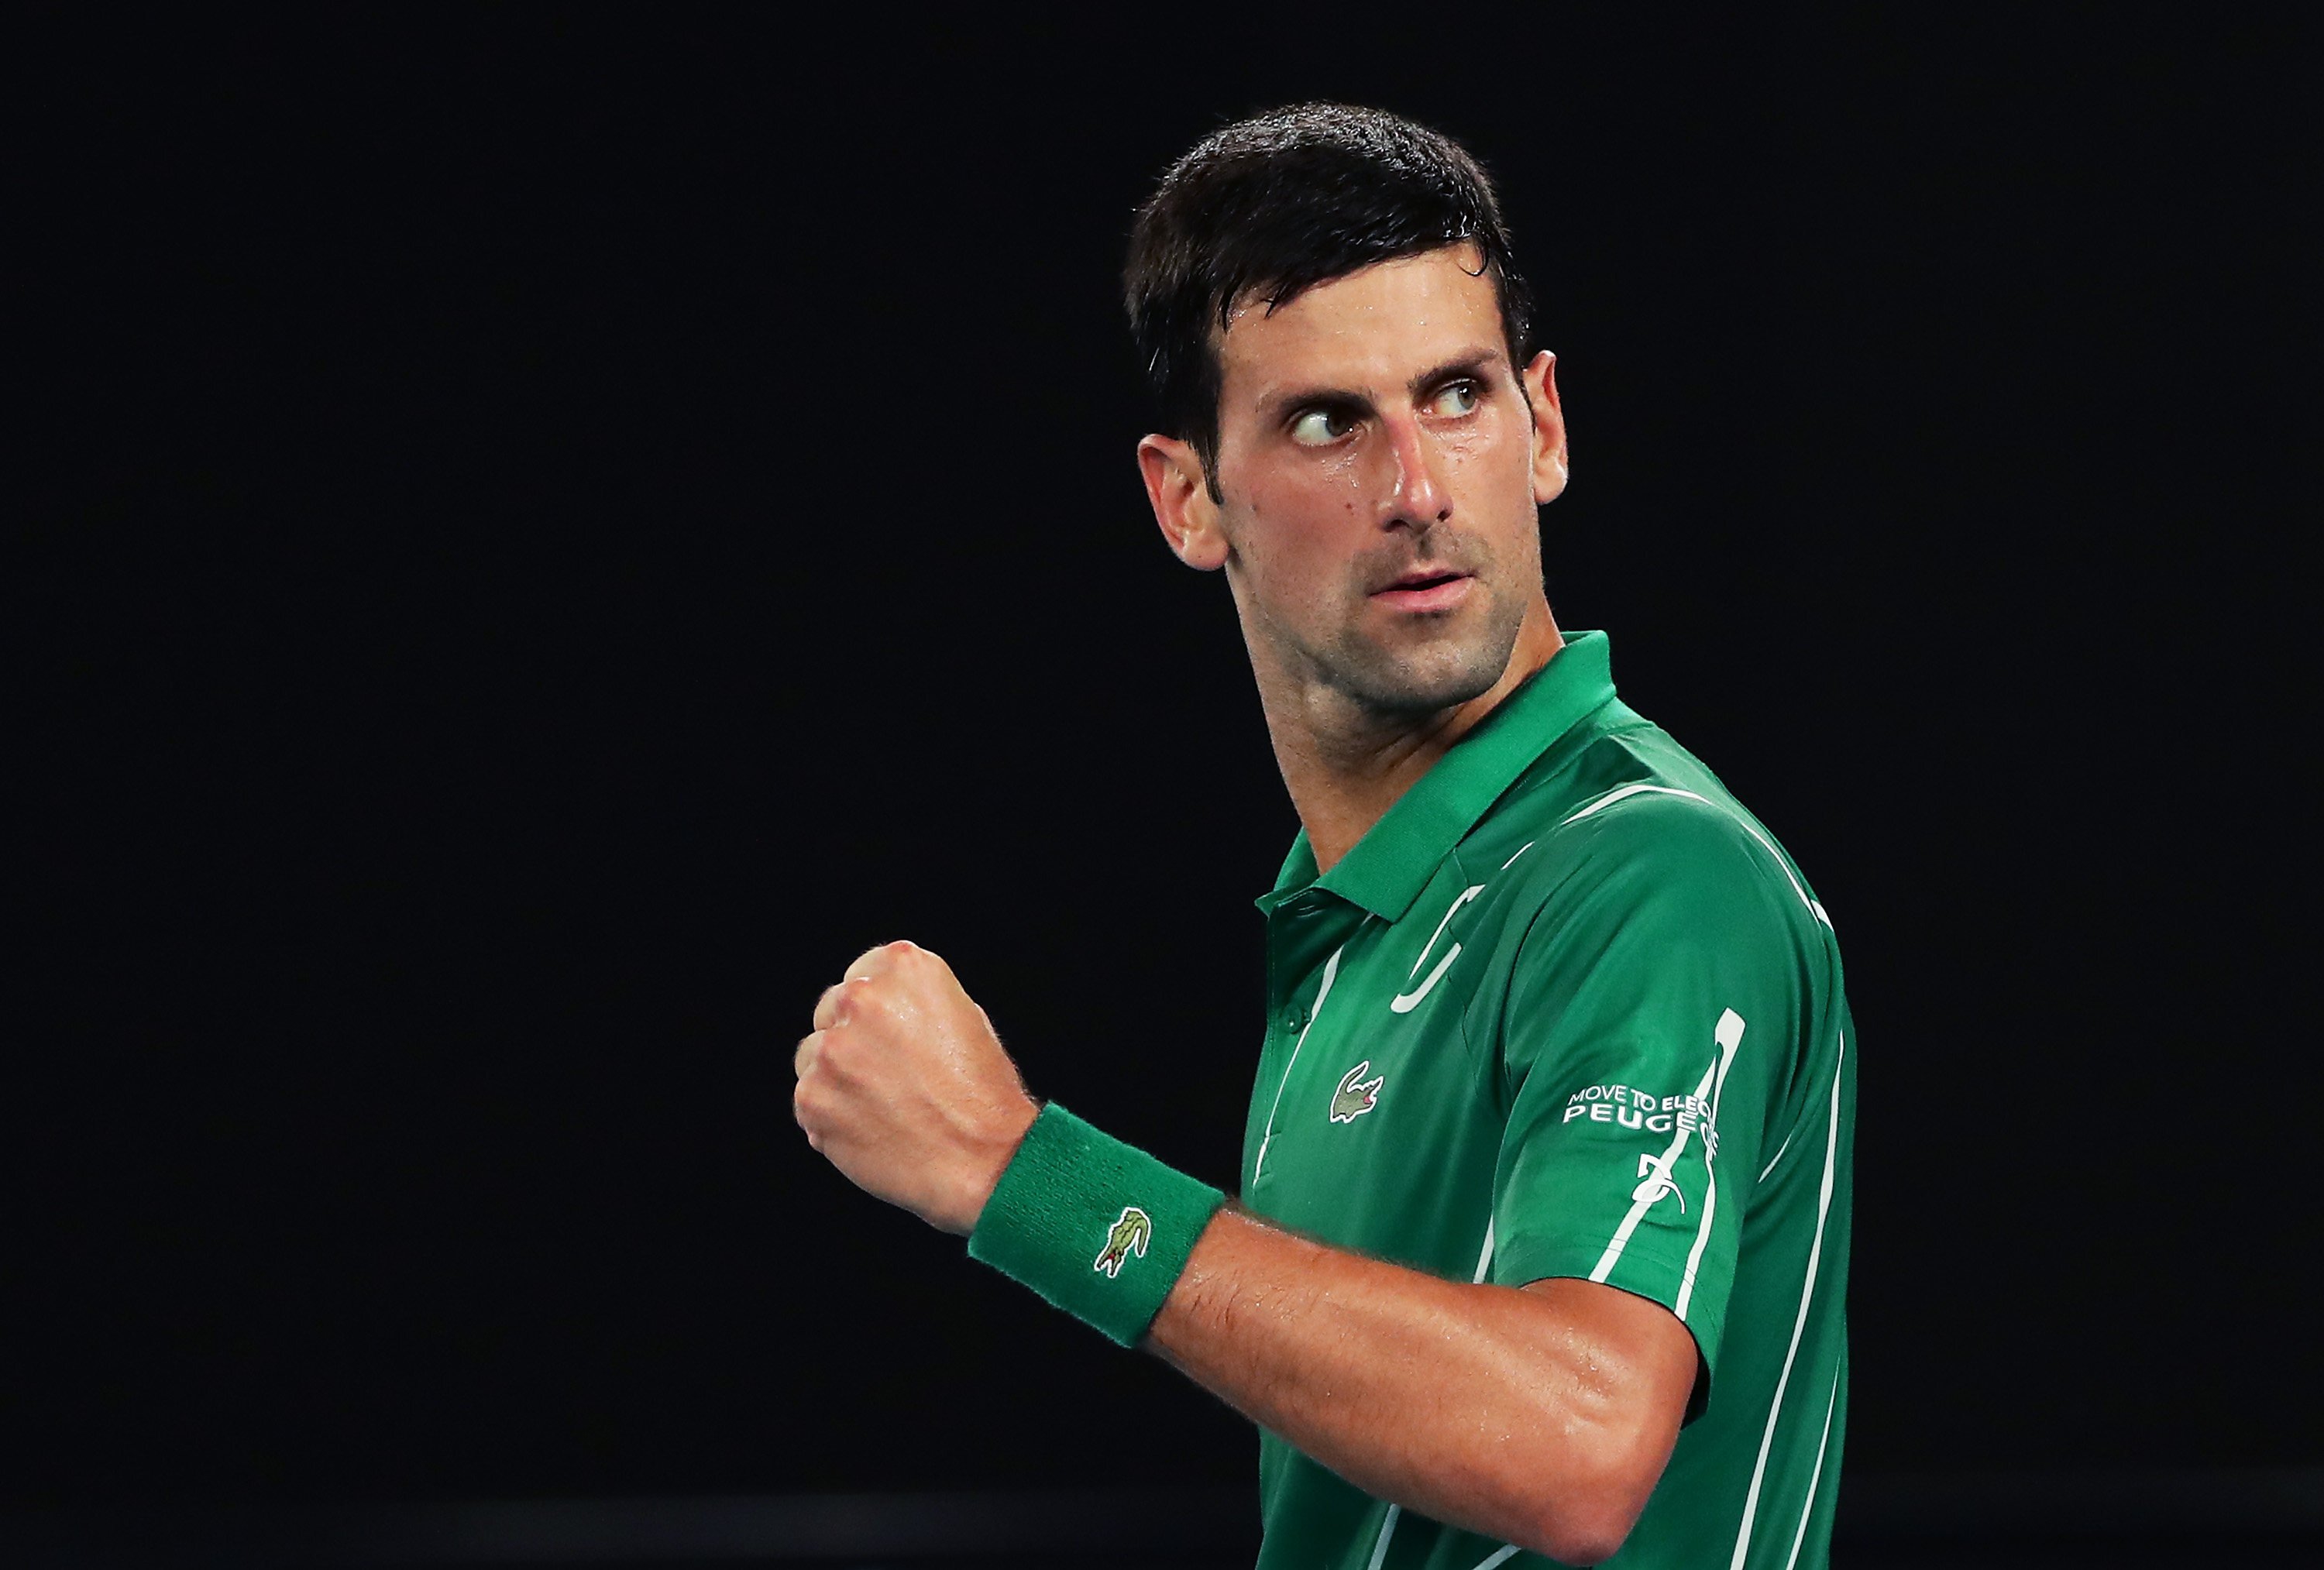 World number one men’s tennis player Novak Djokovic had his visa to enter Australia dramatically revoked on his arrival in Melbourne, but a court overturned the decision. Photo: Getty Images